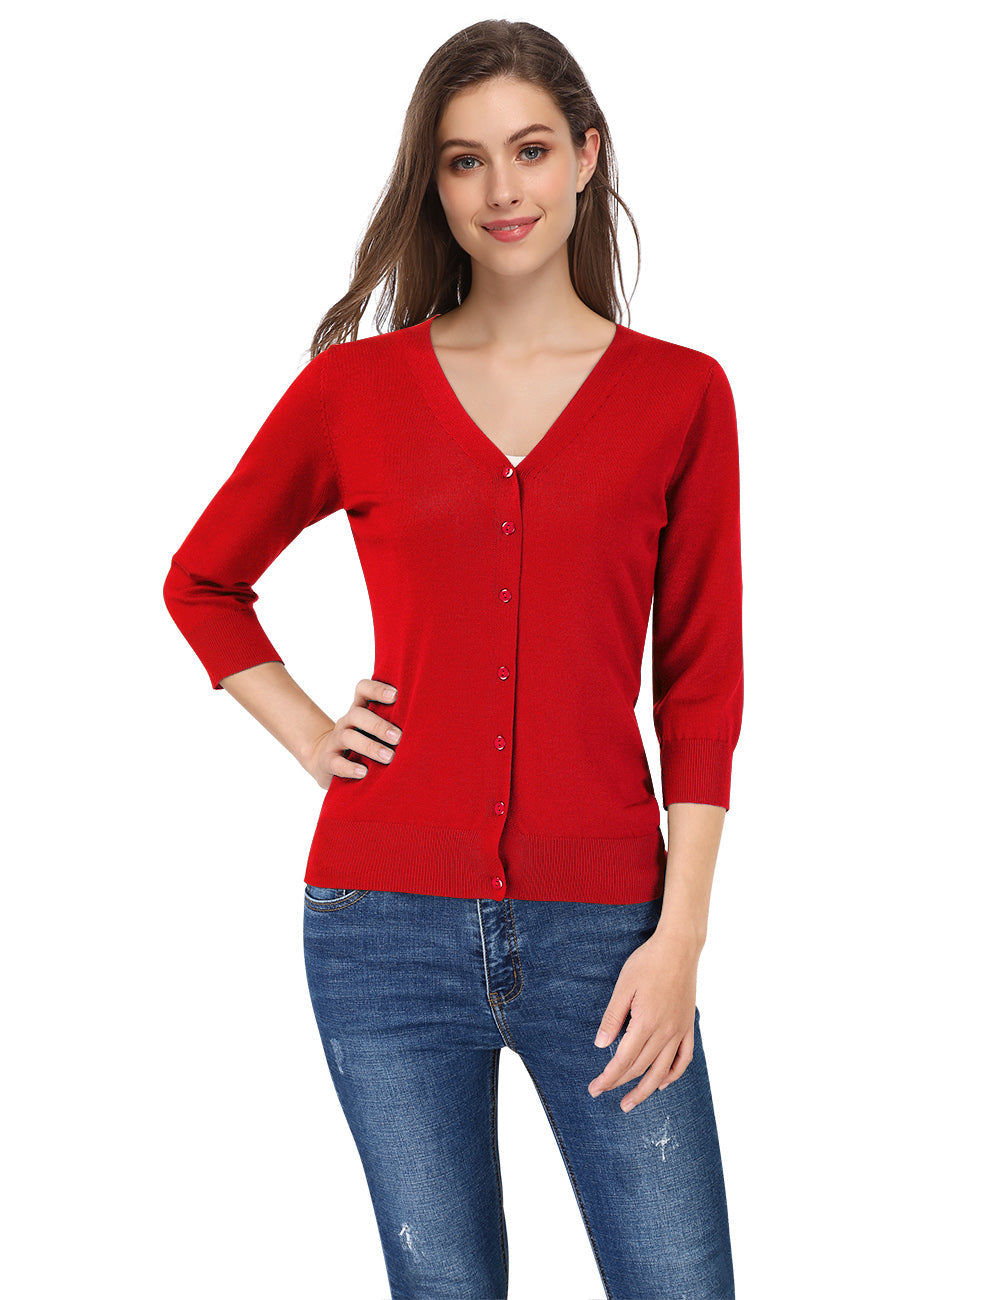 YESFASHION Women's Cardigan Tops Wear Alone or Match with Dress Camel